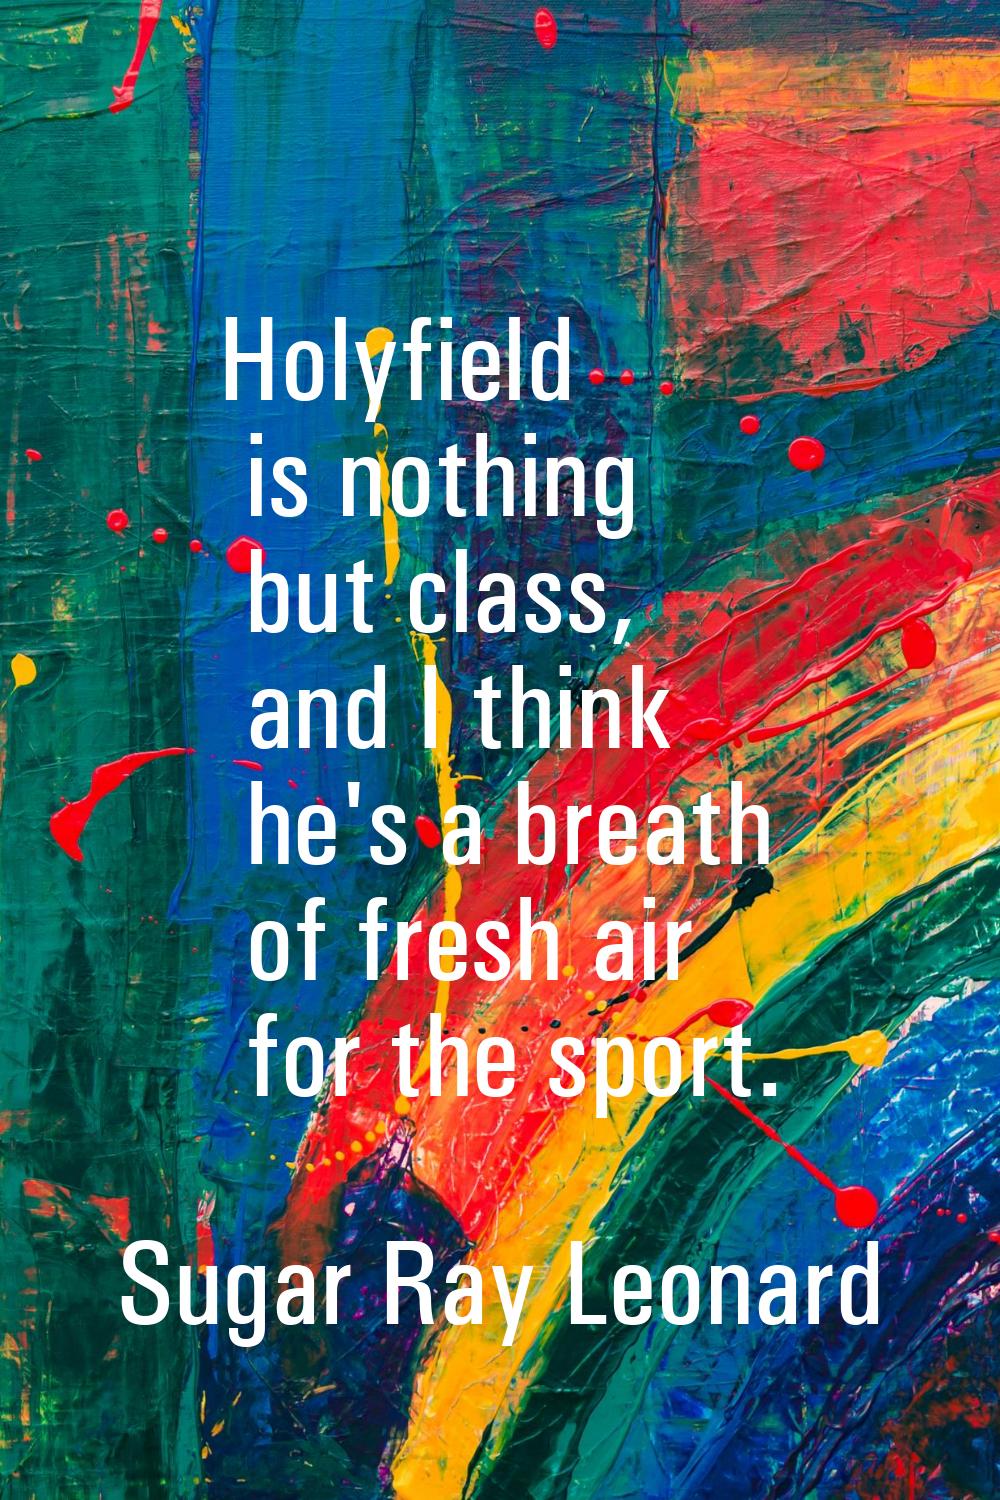 Holyfield is nothing but class, and I think he's a breath of fresh air for the sport.